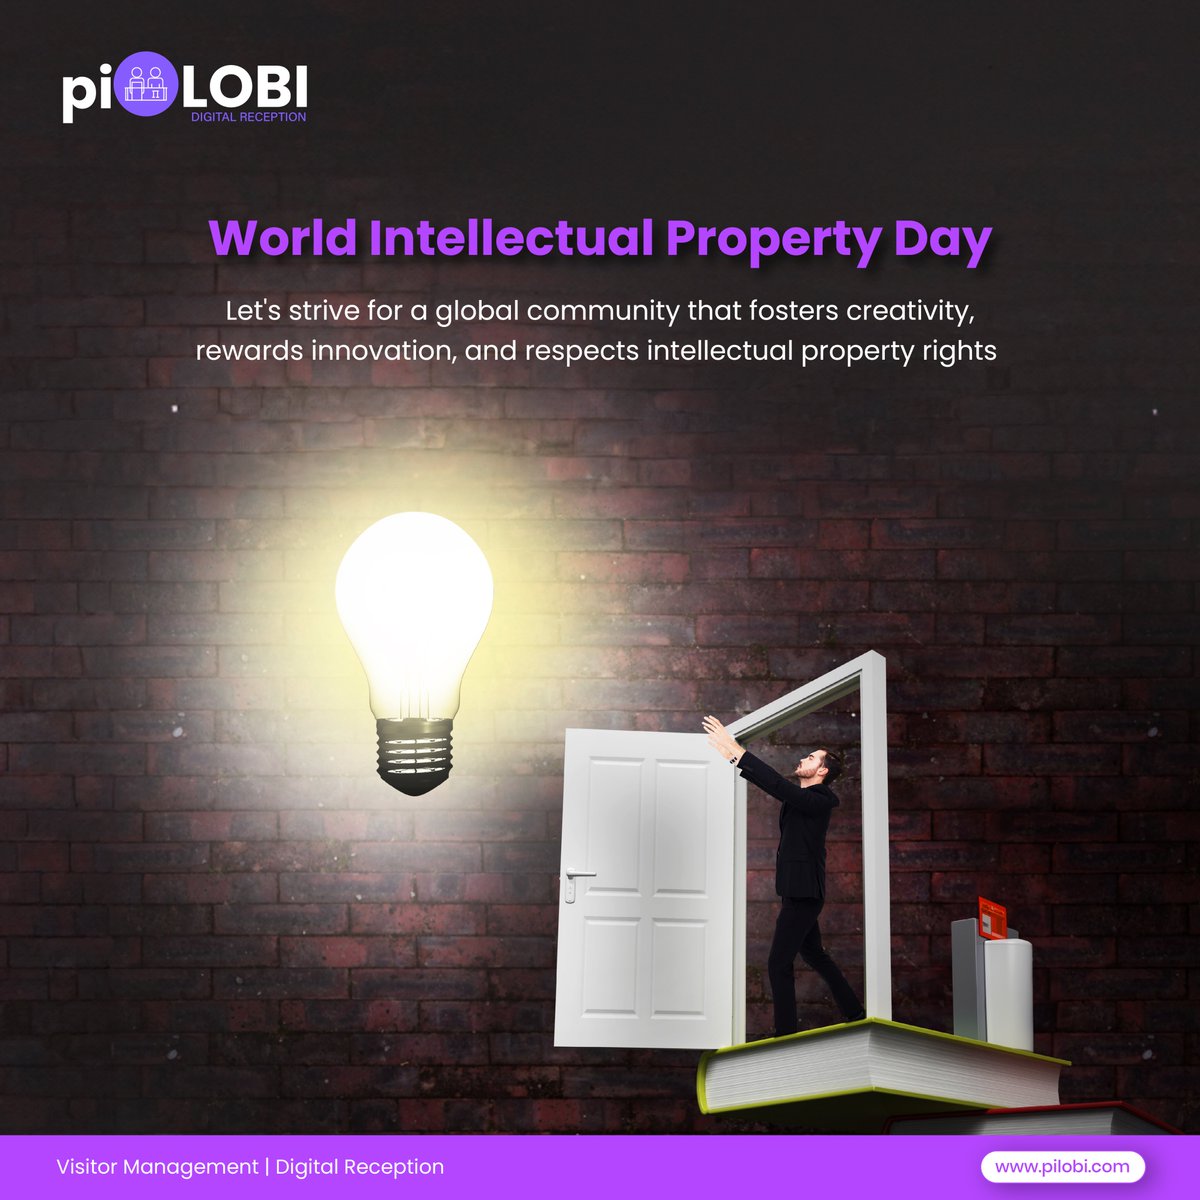 Join us 🤝 in celebrating World Intellectual Property Day! Together, we can build a world 🌏 where ideas flourish and creators thrive.

Visit us: pilobi.com 👈

#WorldIPDay #Innovations #iplaw #copyrightlaw #visitormanagementsystem #visitormanagementsoftware #pilobi